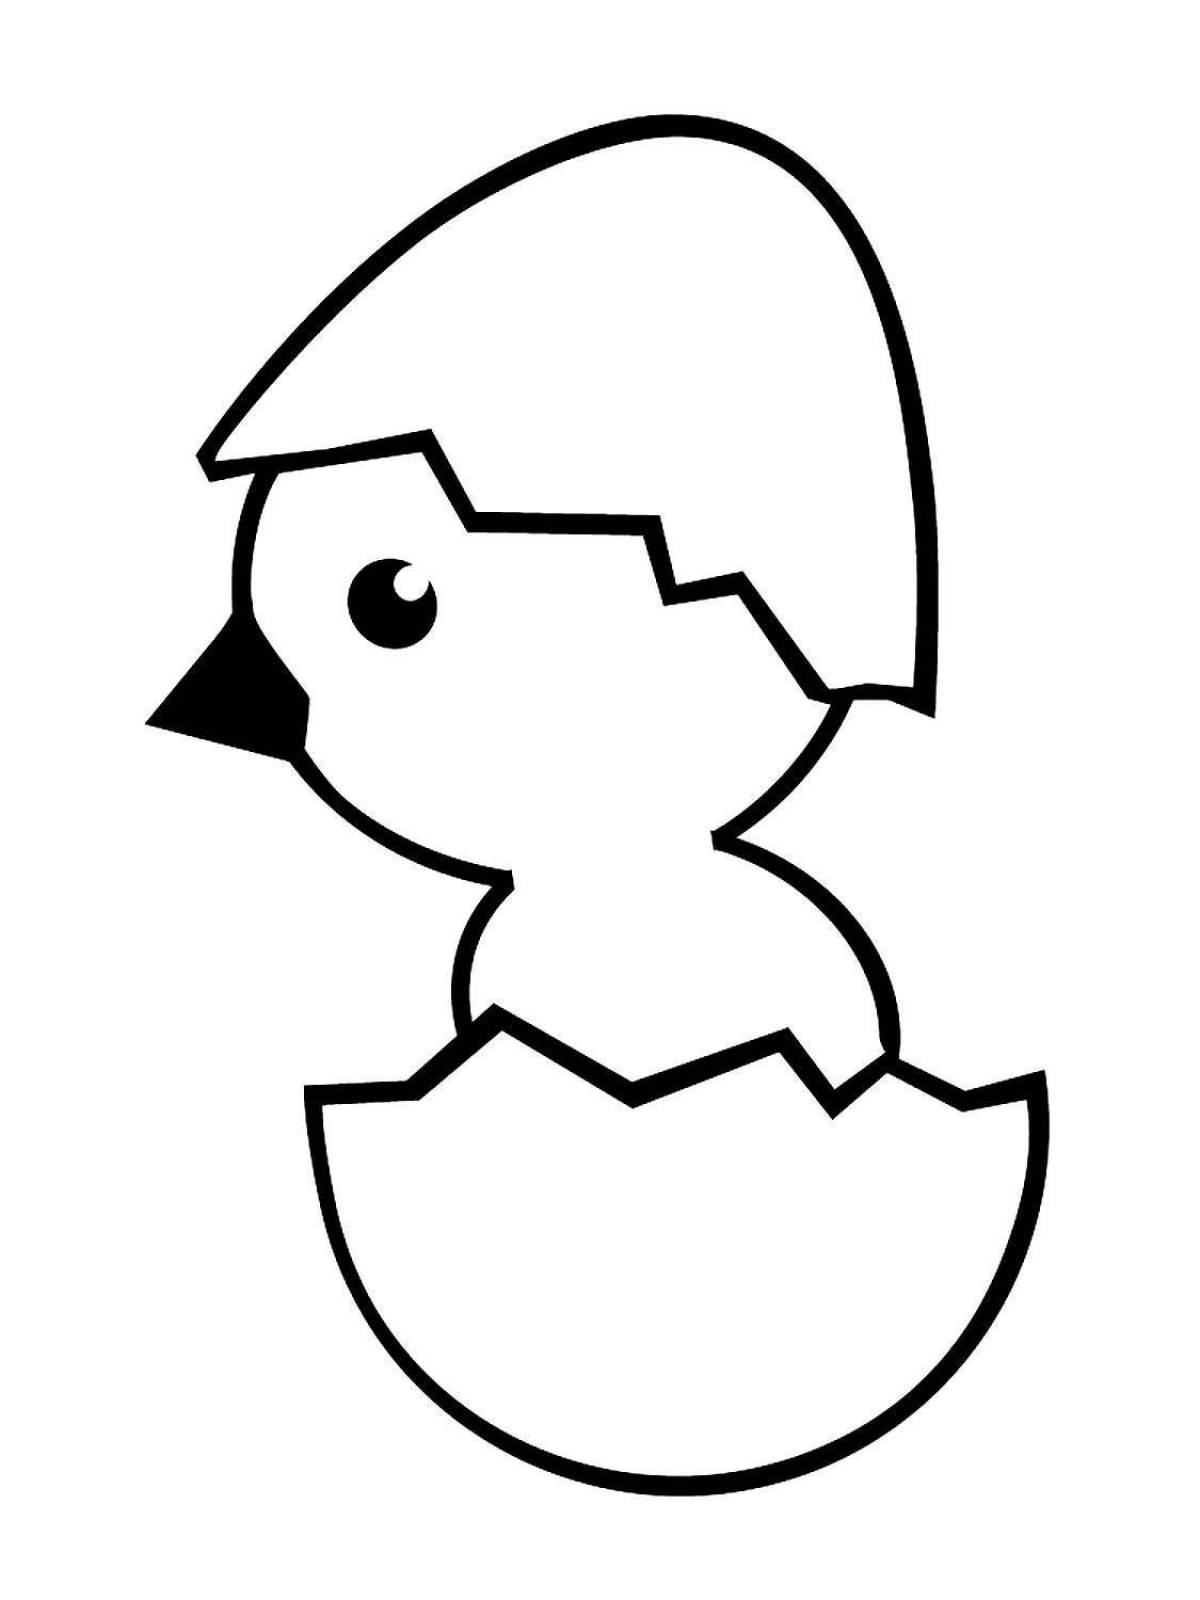 Coloring page playful chick in egg